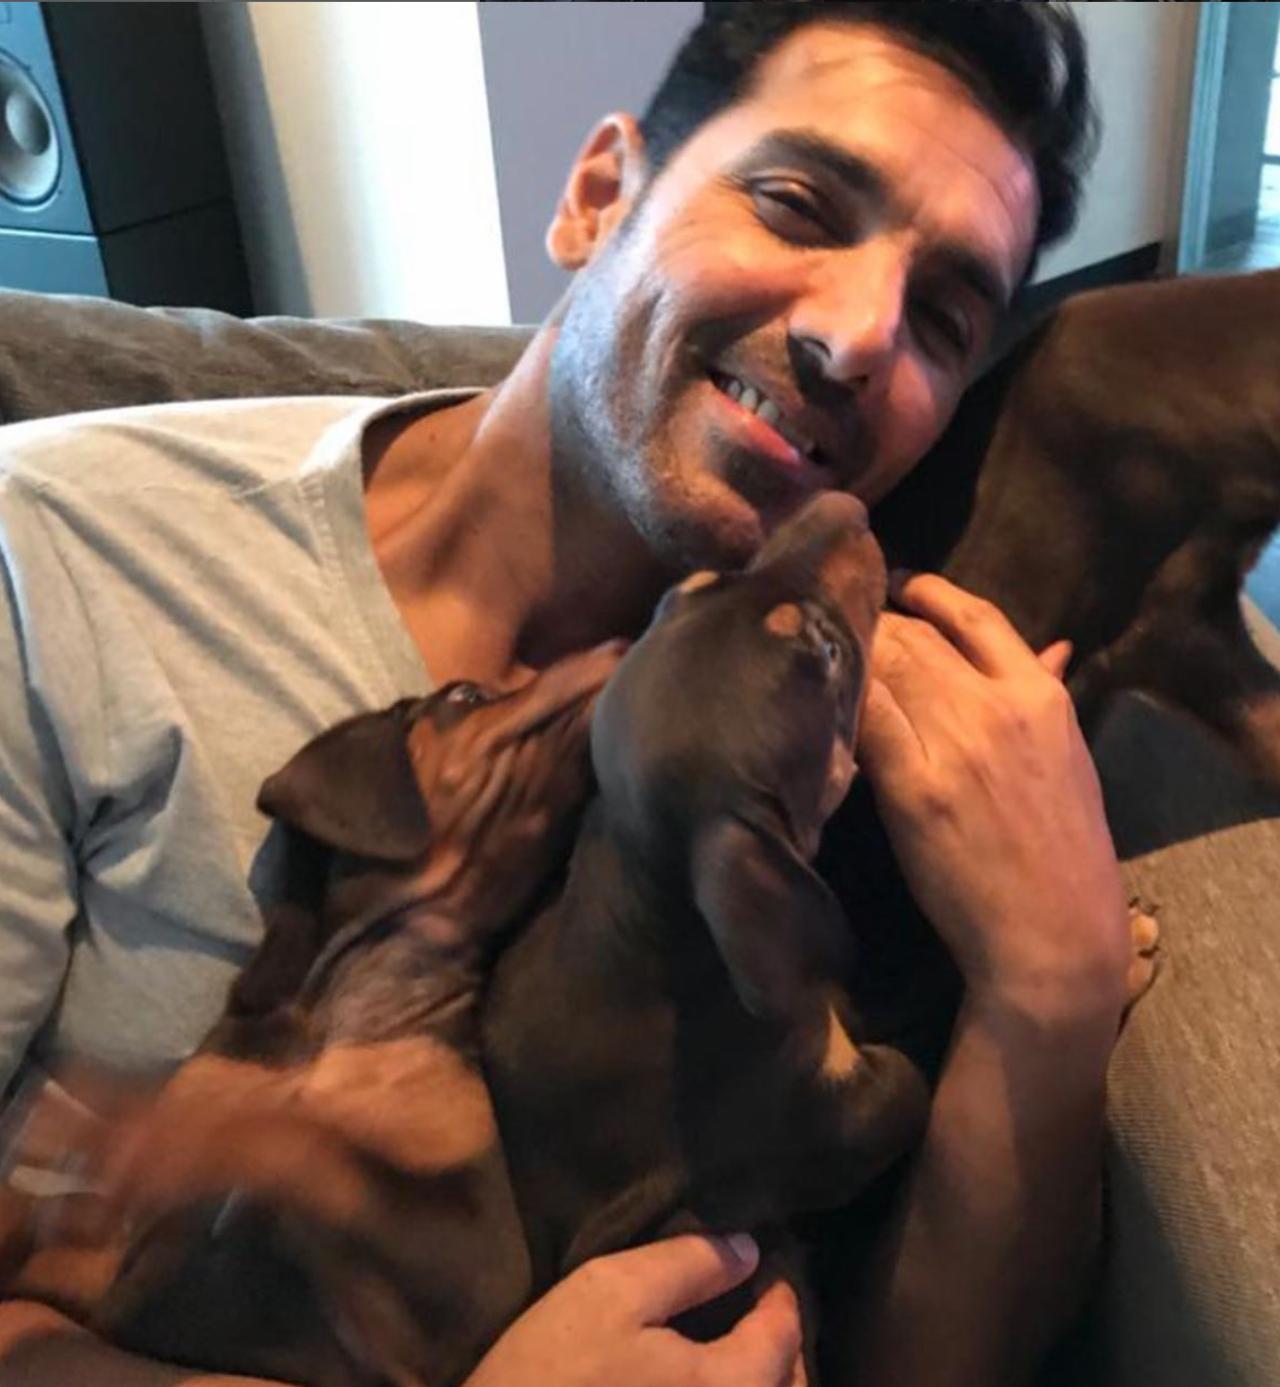 John Abraham and his wife Priya Runchal share a deep passion for dogs and take pride in being the loving parents of two gorgeous canines named Sia and Bailey. Frequently seen enjoying quality moments with their furry companions, the couple wholeheartedly cares for their pets.